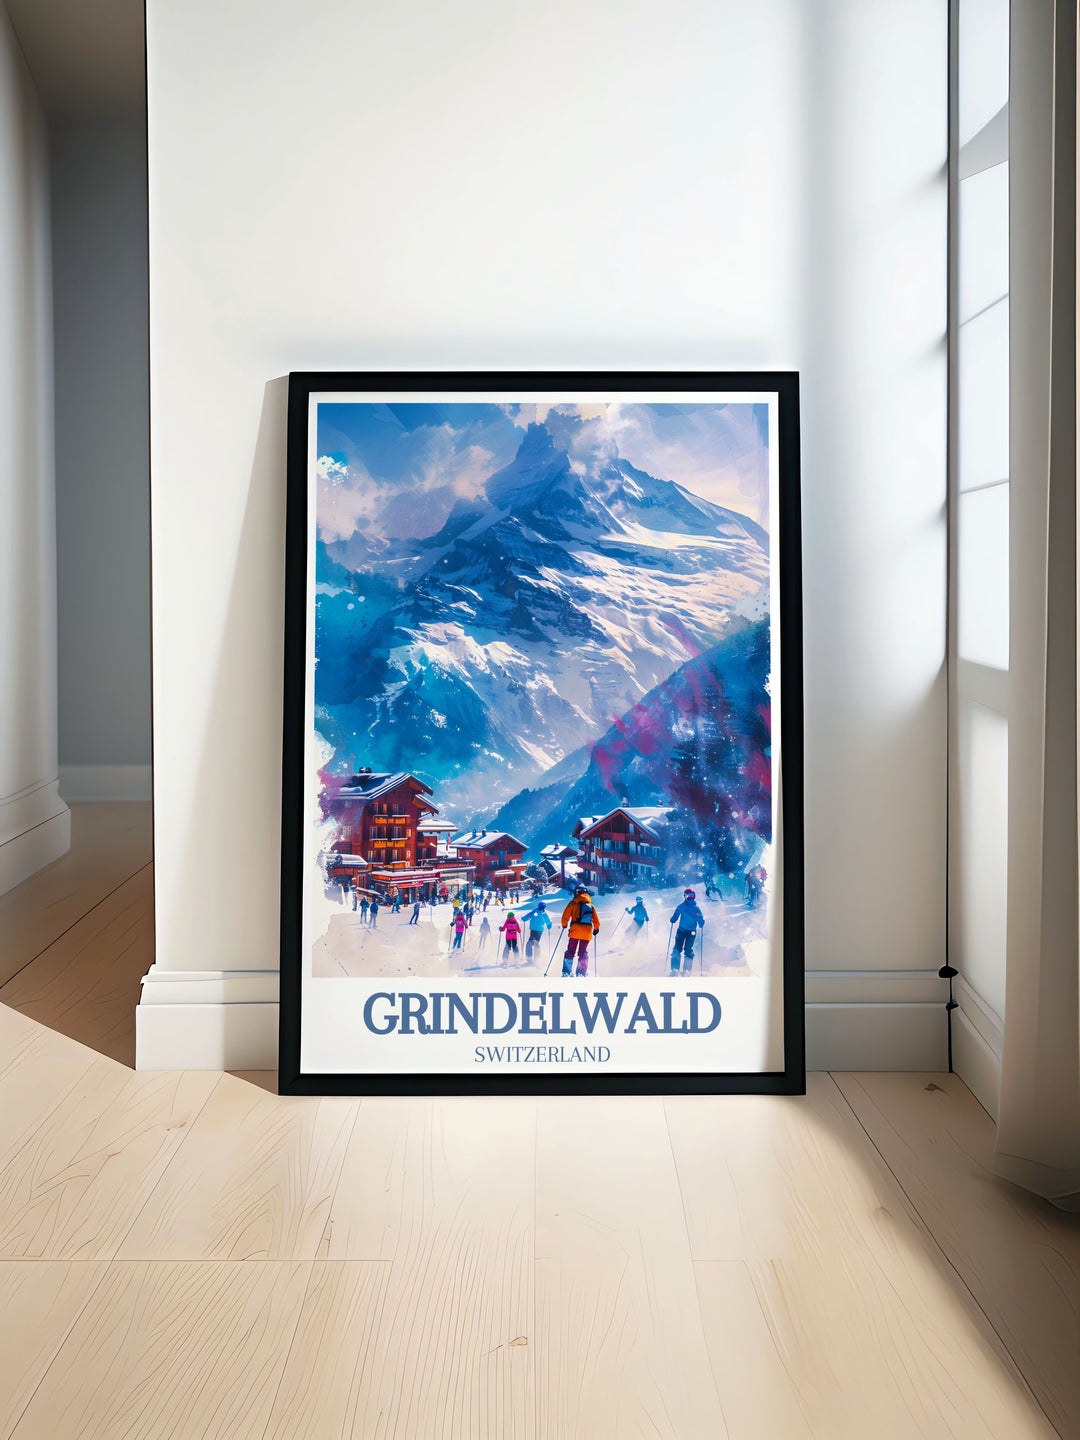 This travel poster of Grindelwald illustrates the charming alpine village and surrounding mountains, offering a picturesque view of one of Switzerlands most beloved ski resorts.